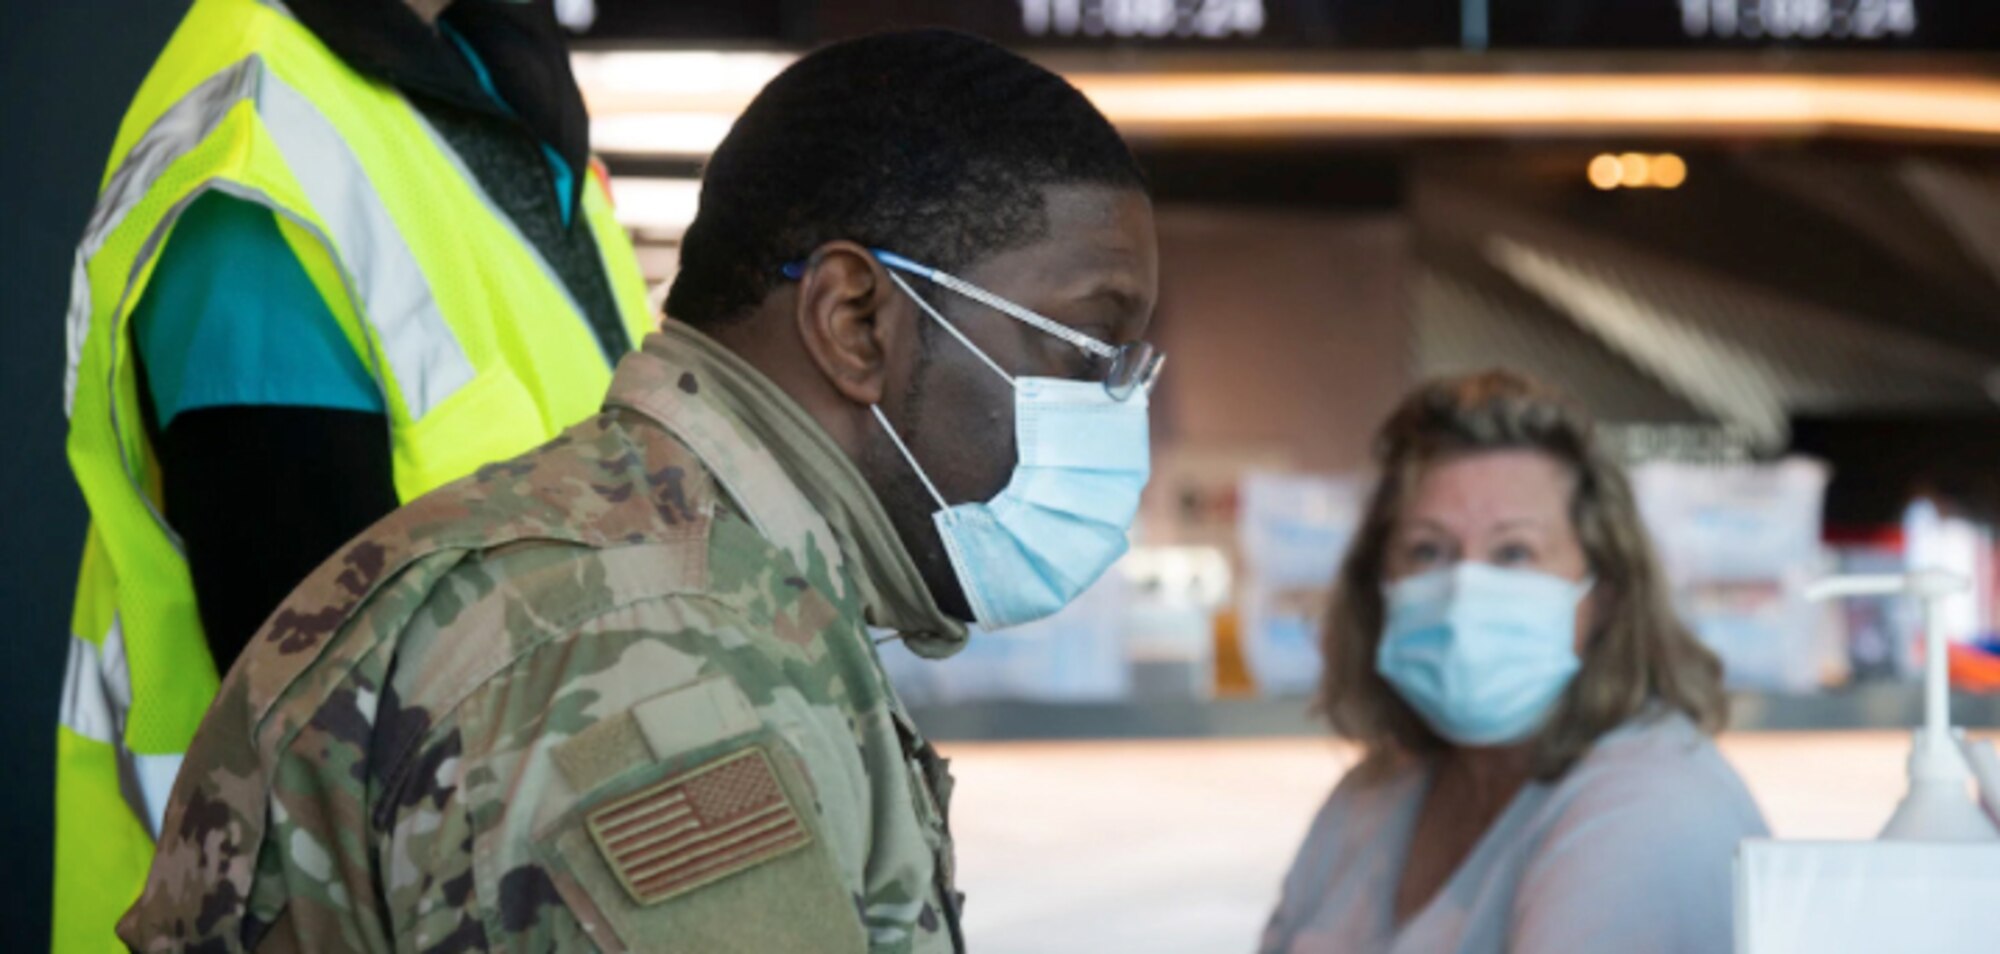 U.S. Air Force Airman Johnnie Boggs of the 175th Medical Group works at a computer terminal entering a patient's information before they receive the COVID-19 vaccine at M&T Bank Stadium in Baltimore, Md., Feb. 25, 2021. The Maryland National Guard is supporting Maryland's COVID-19 vaccination initiative.